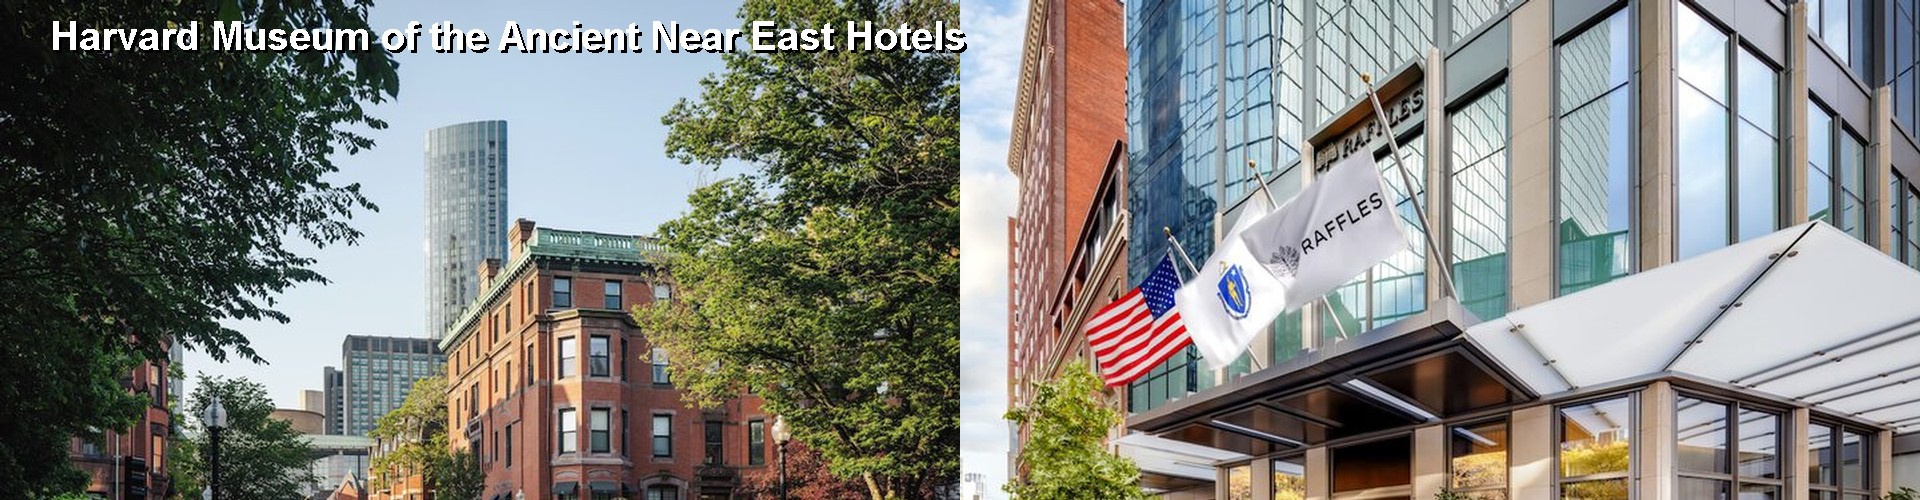 5 Best Hotels near Harvard Museum of the Ancient Near East